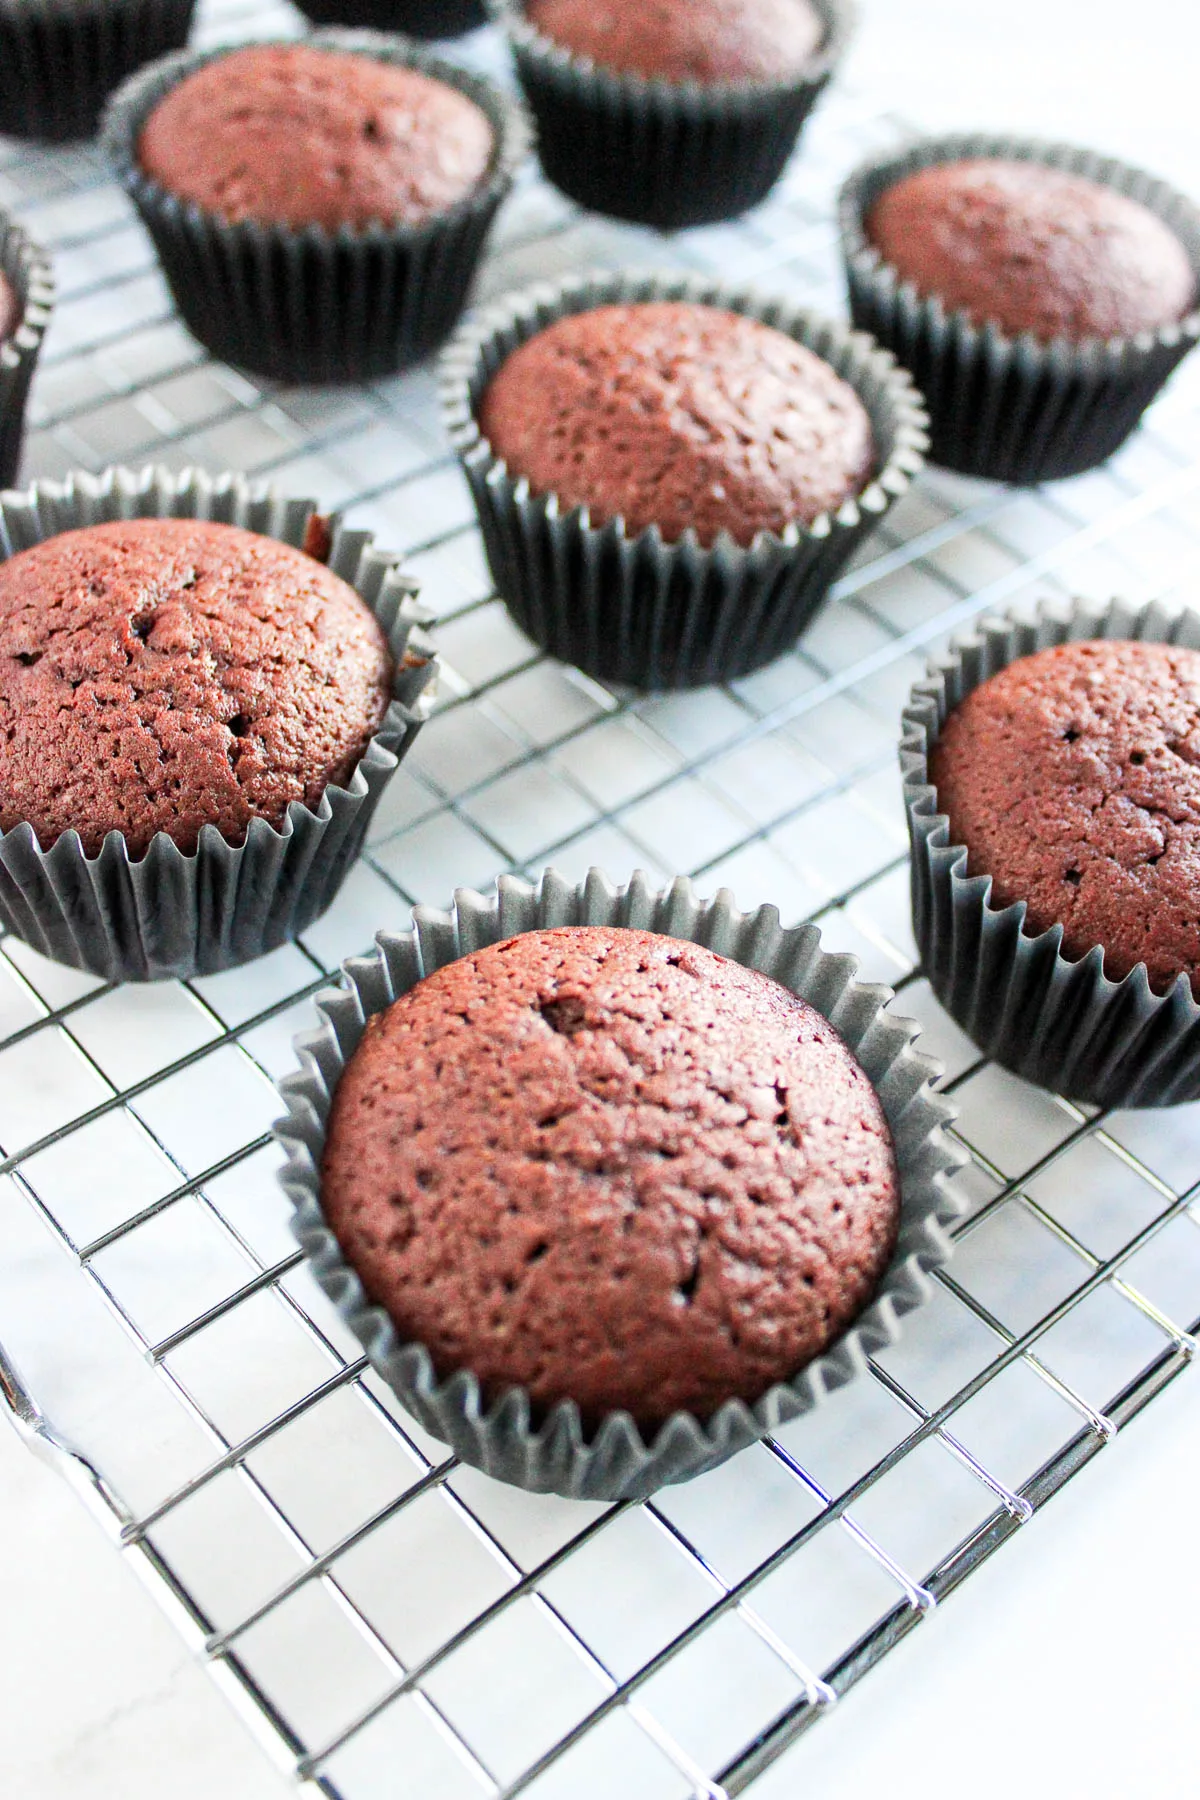 Baked chocolate cupcakes cooling on a cooling rack. 